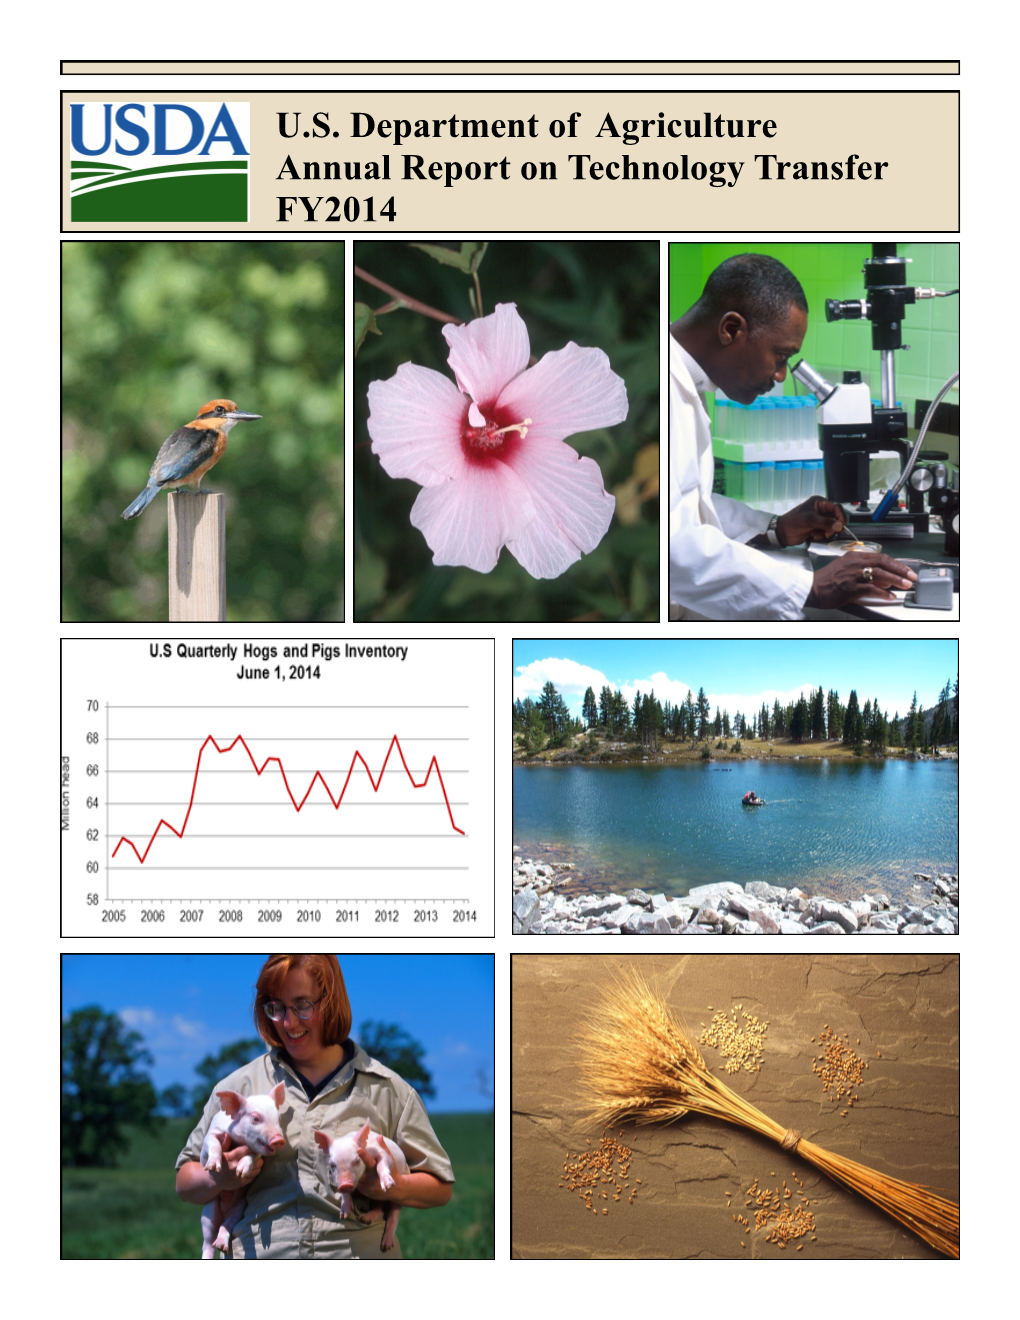 Annual Reporting on Technology Transfer in USDA, FY 2014